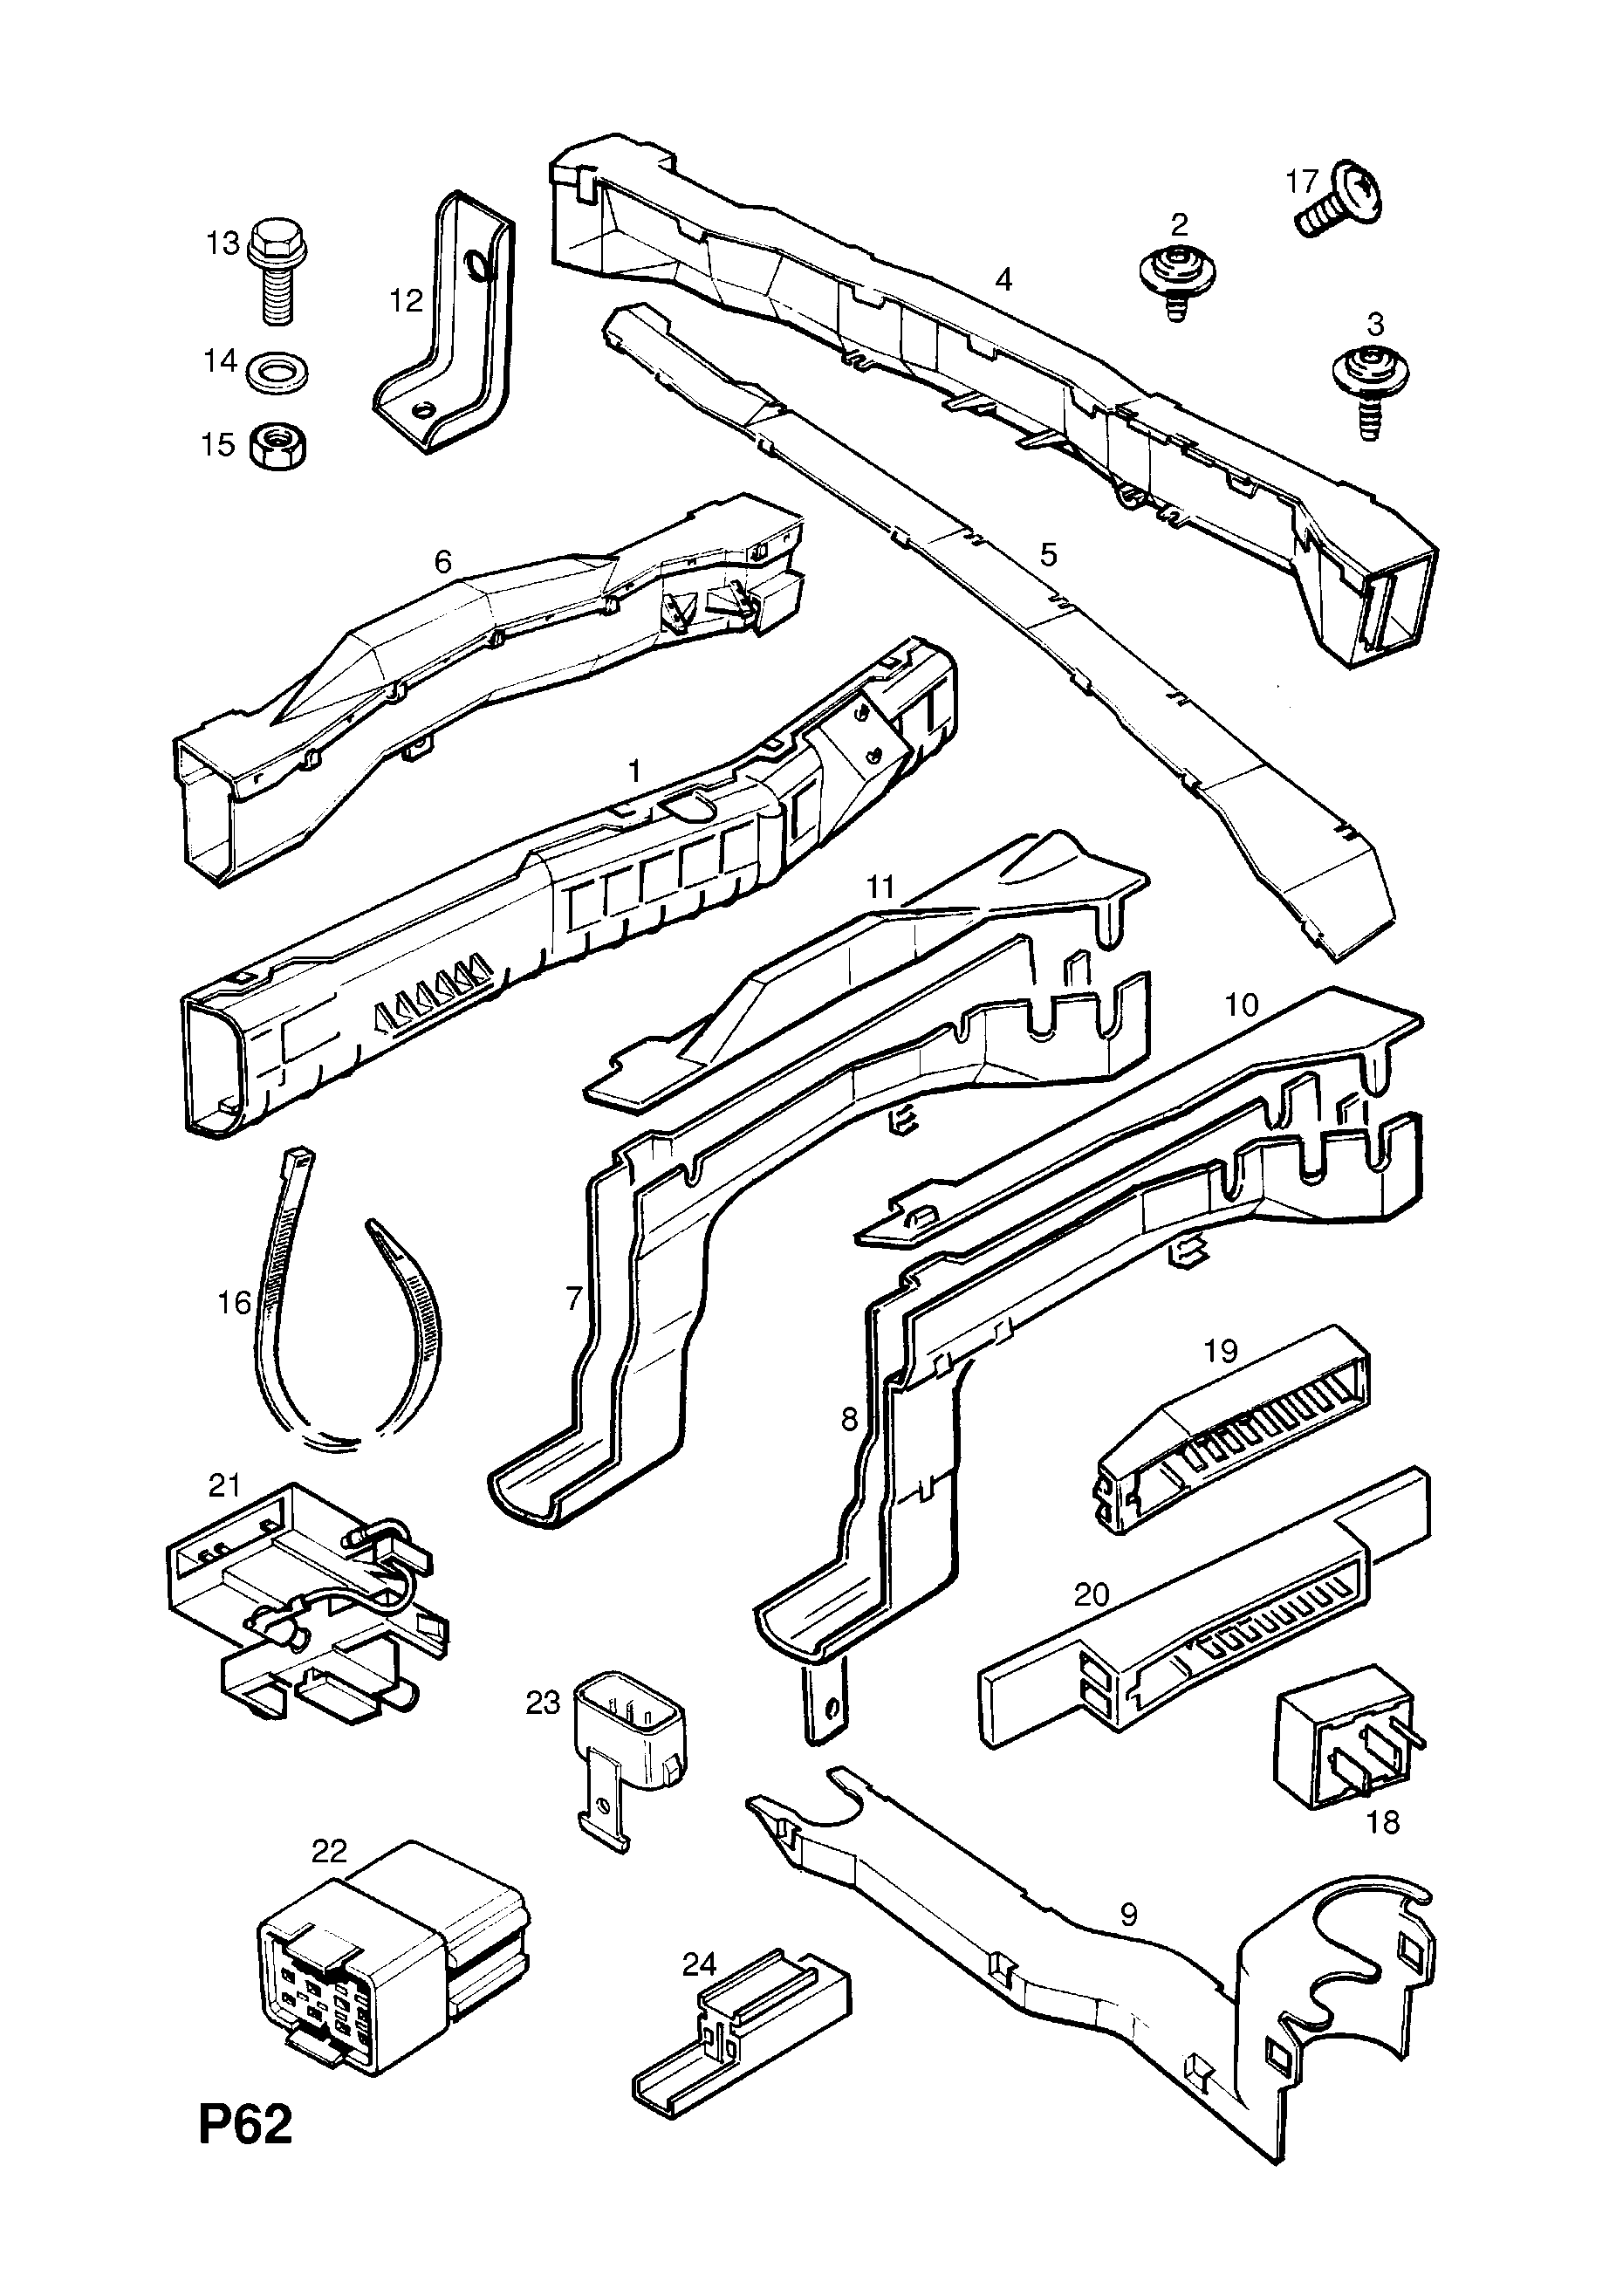 INSTRUMENT PANEL WIRING HARNESS FITTINGS